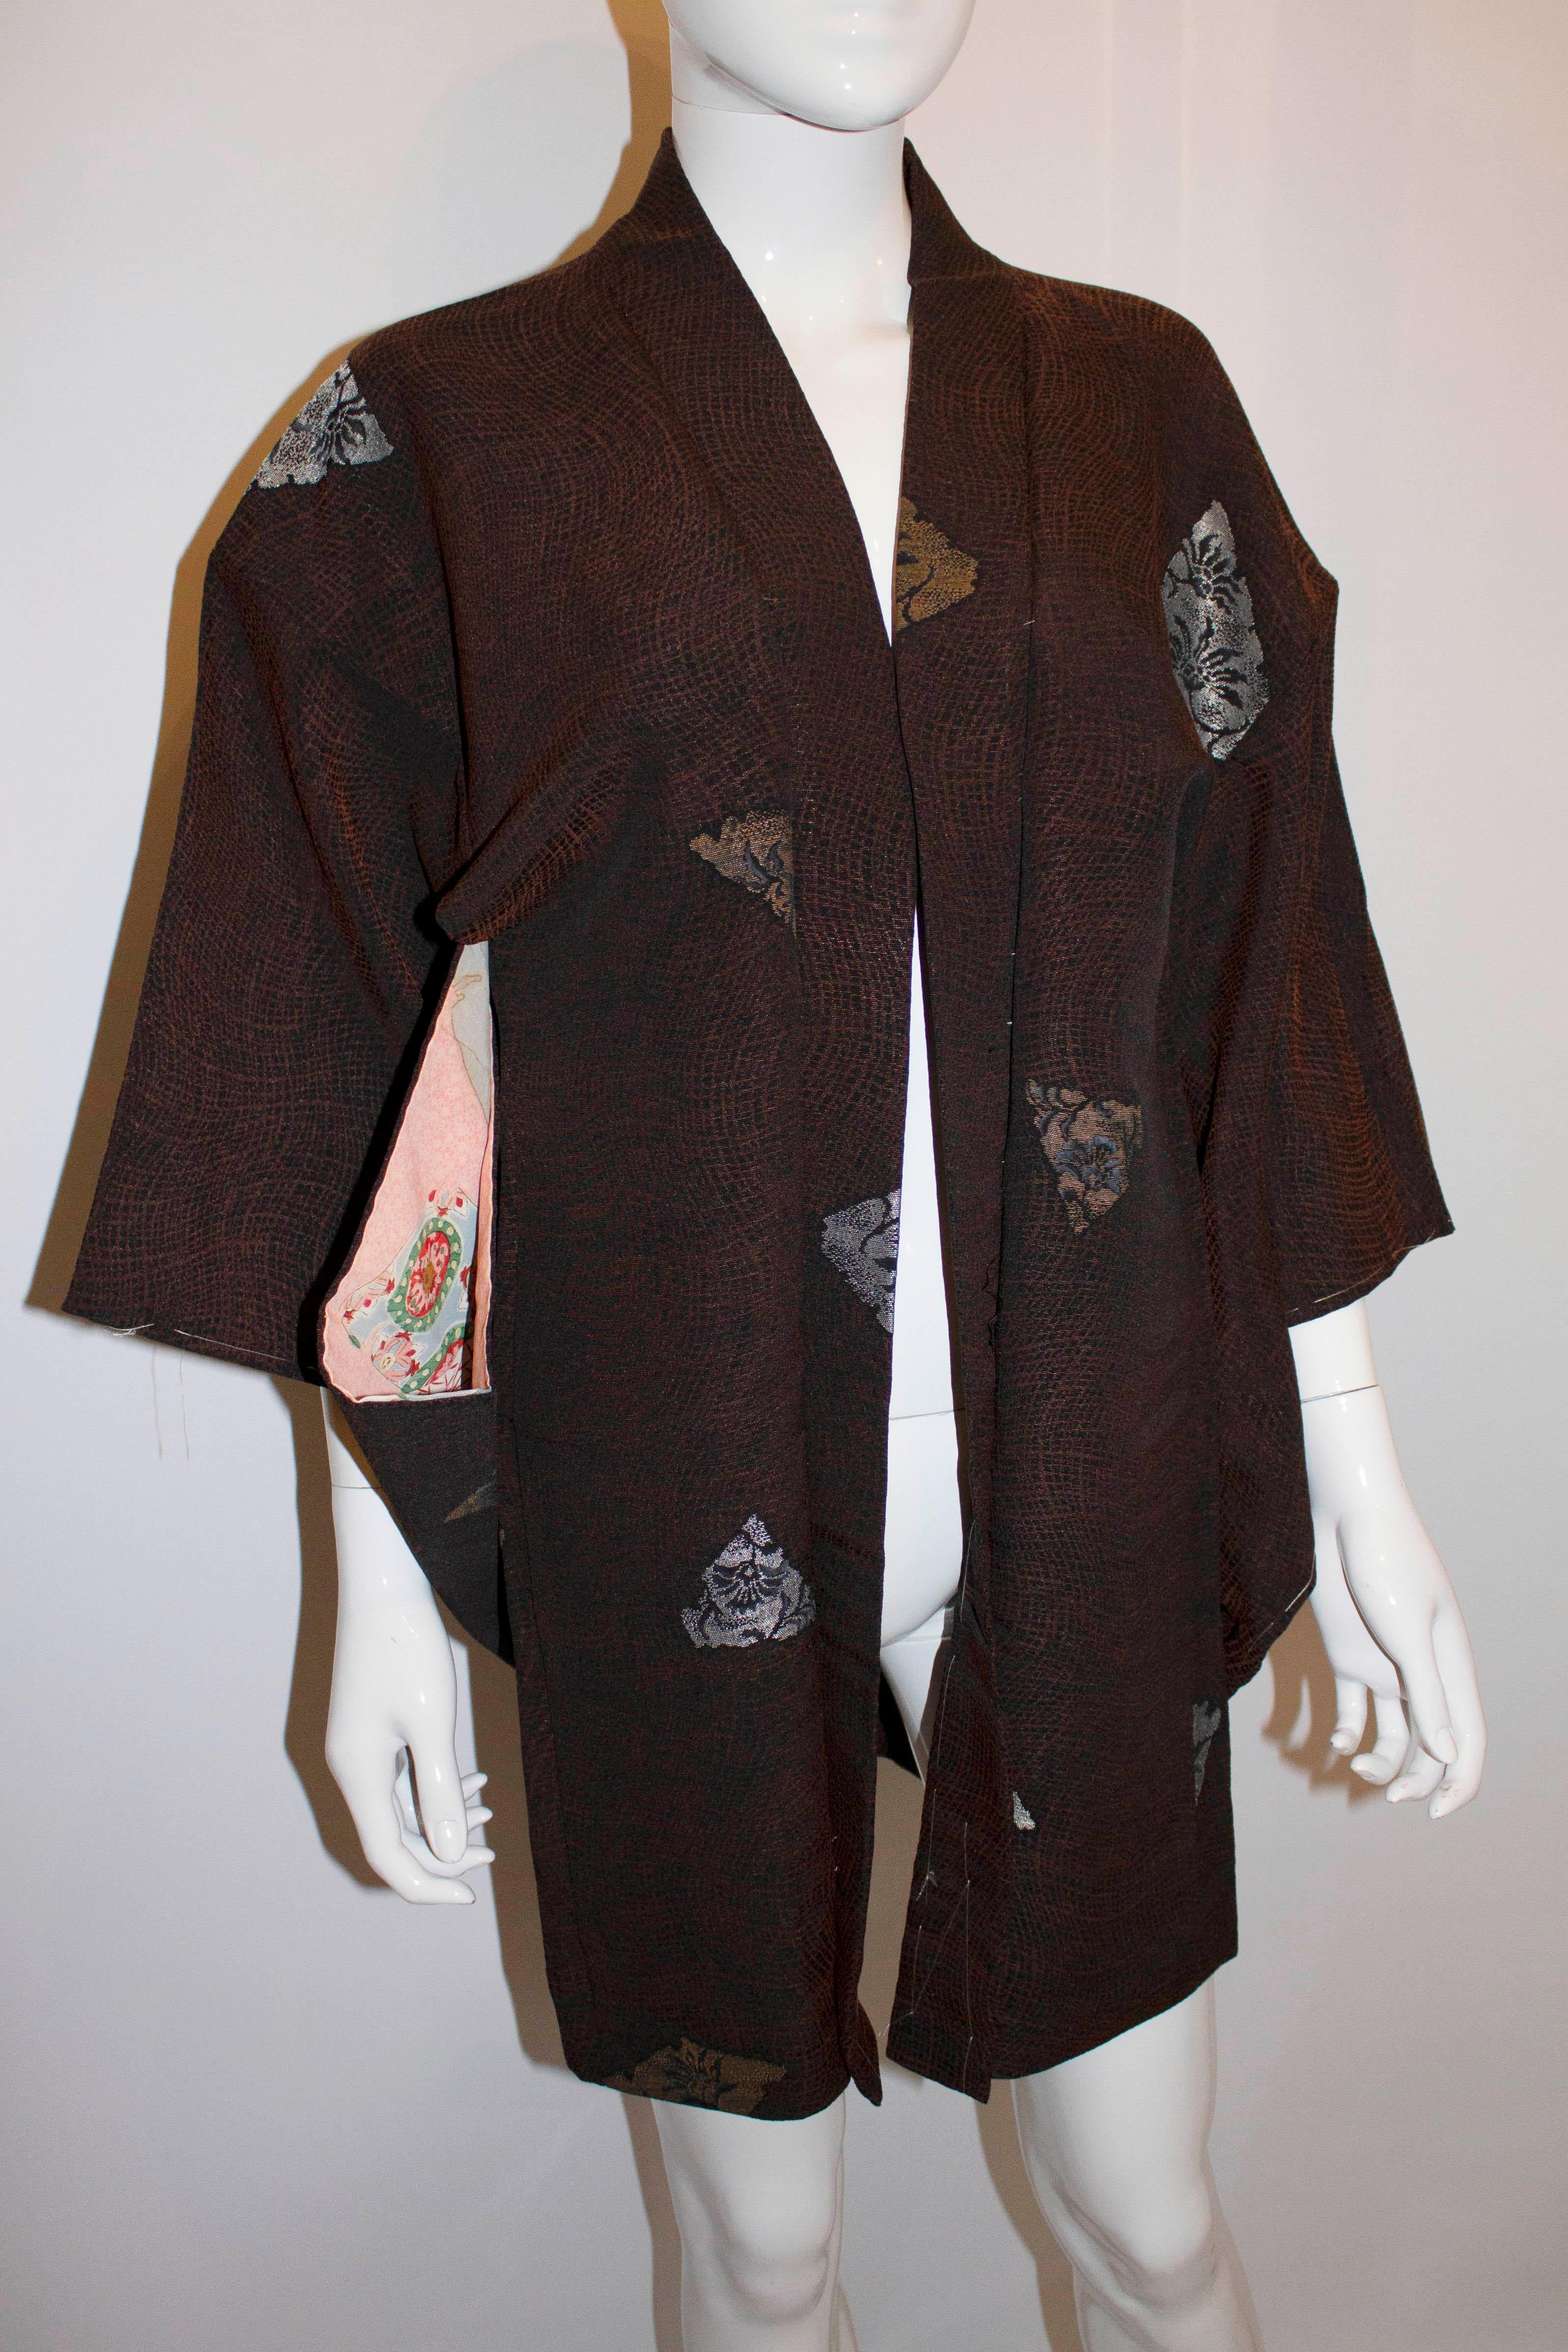 A short vintage kimono in black and brown woven brocade with a design of half open fans woven in gold 
 and silver. The kimono has a mons or family crest on the nape of the neck , and the kimono is lined in silk.
Measurements : length 33'' , bust up